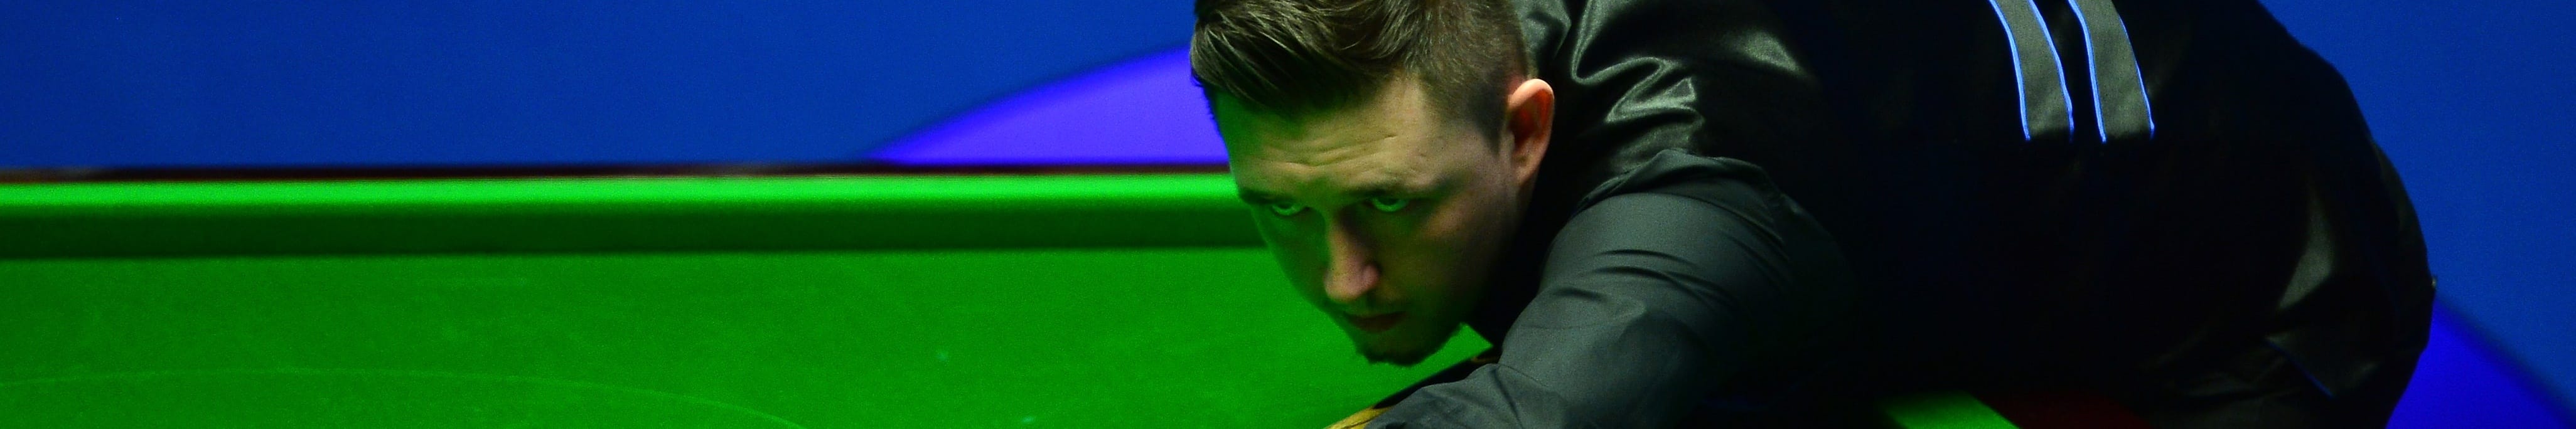 33/1 shot catches the eye in UK Championship snooker betting